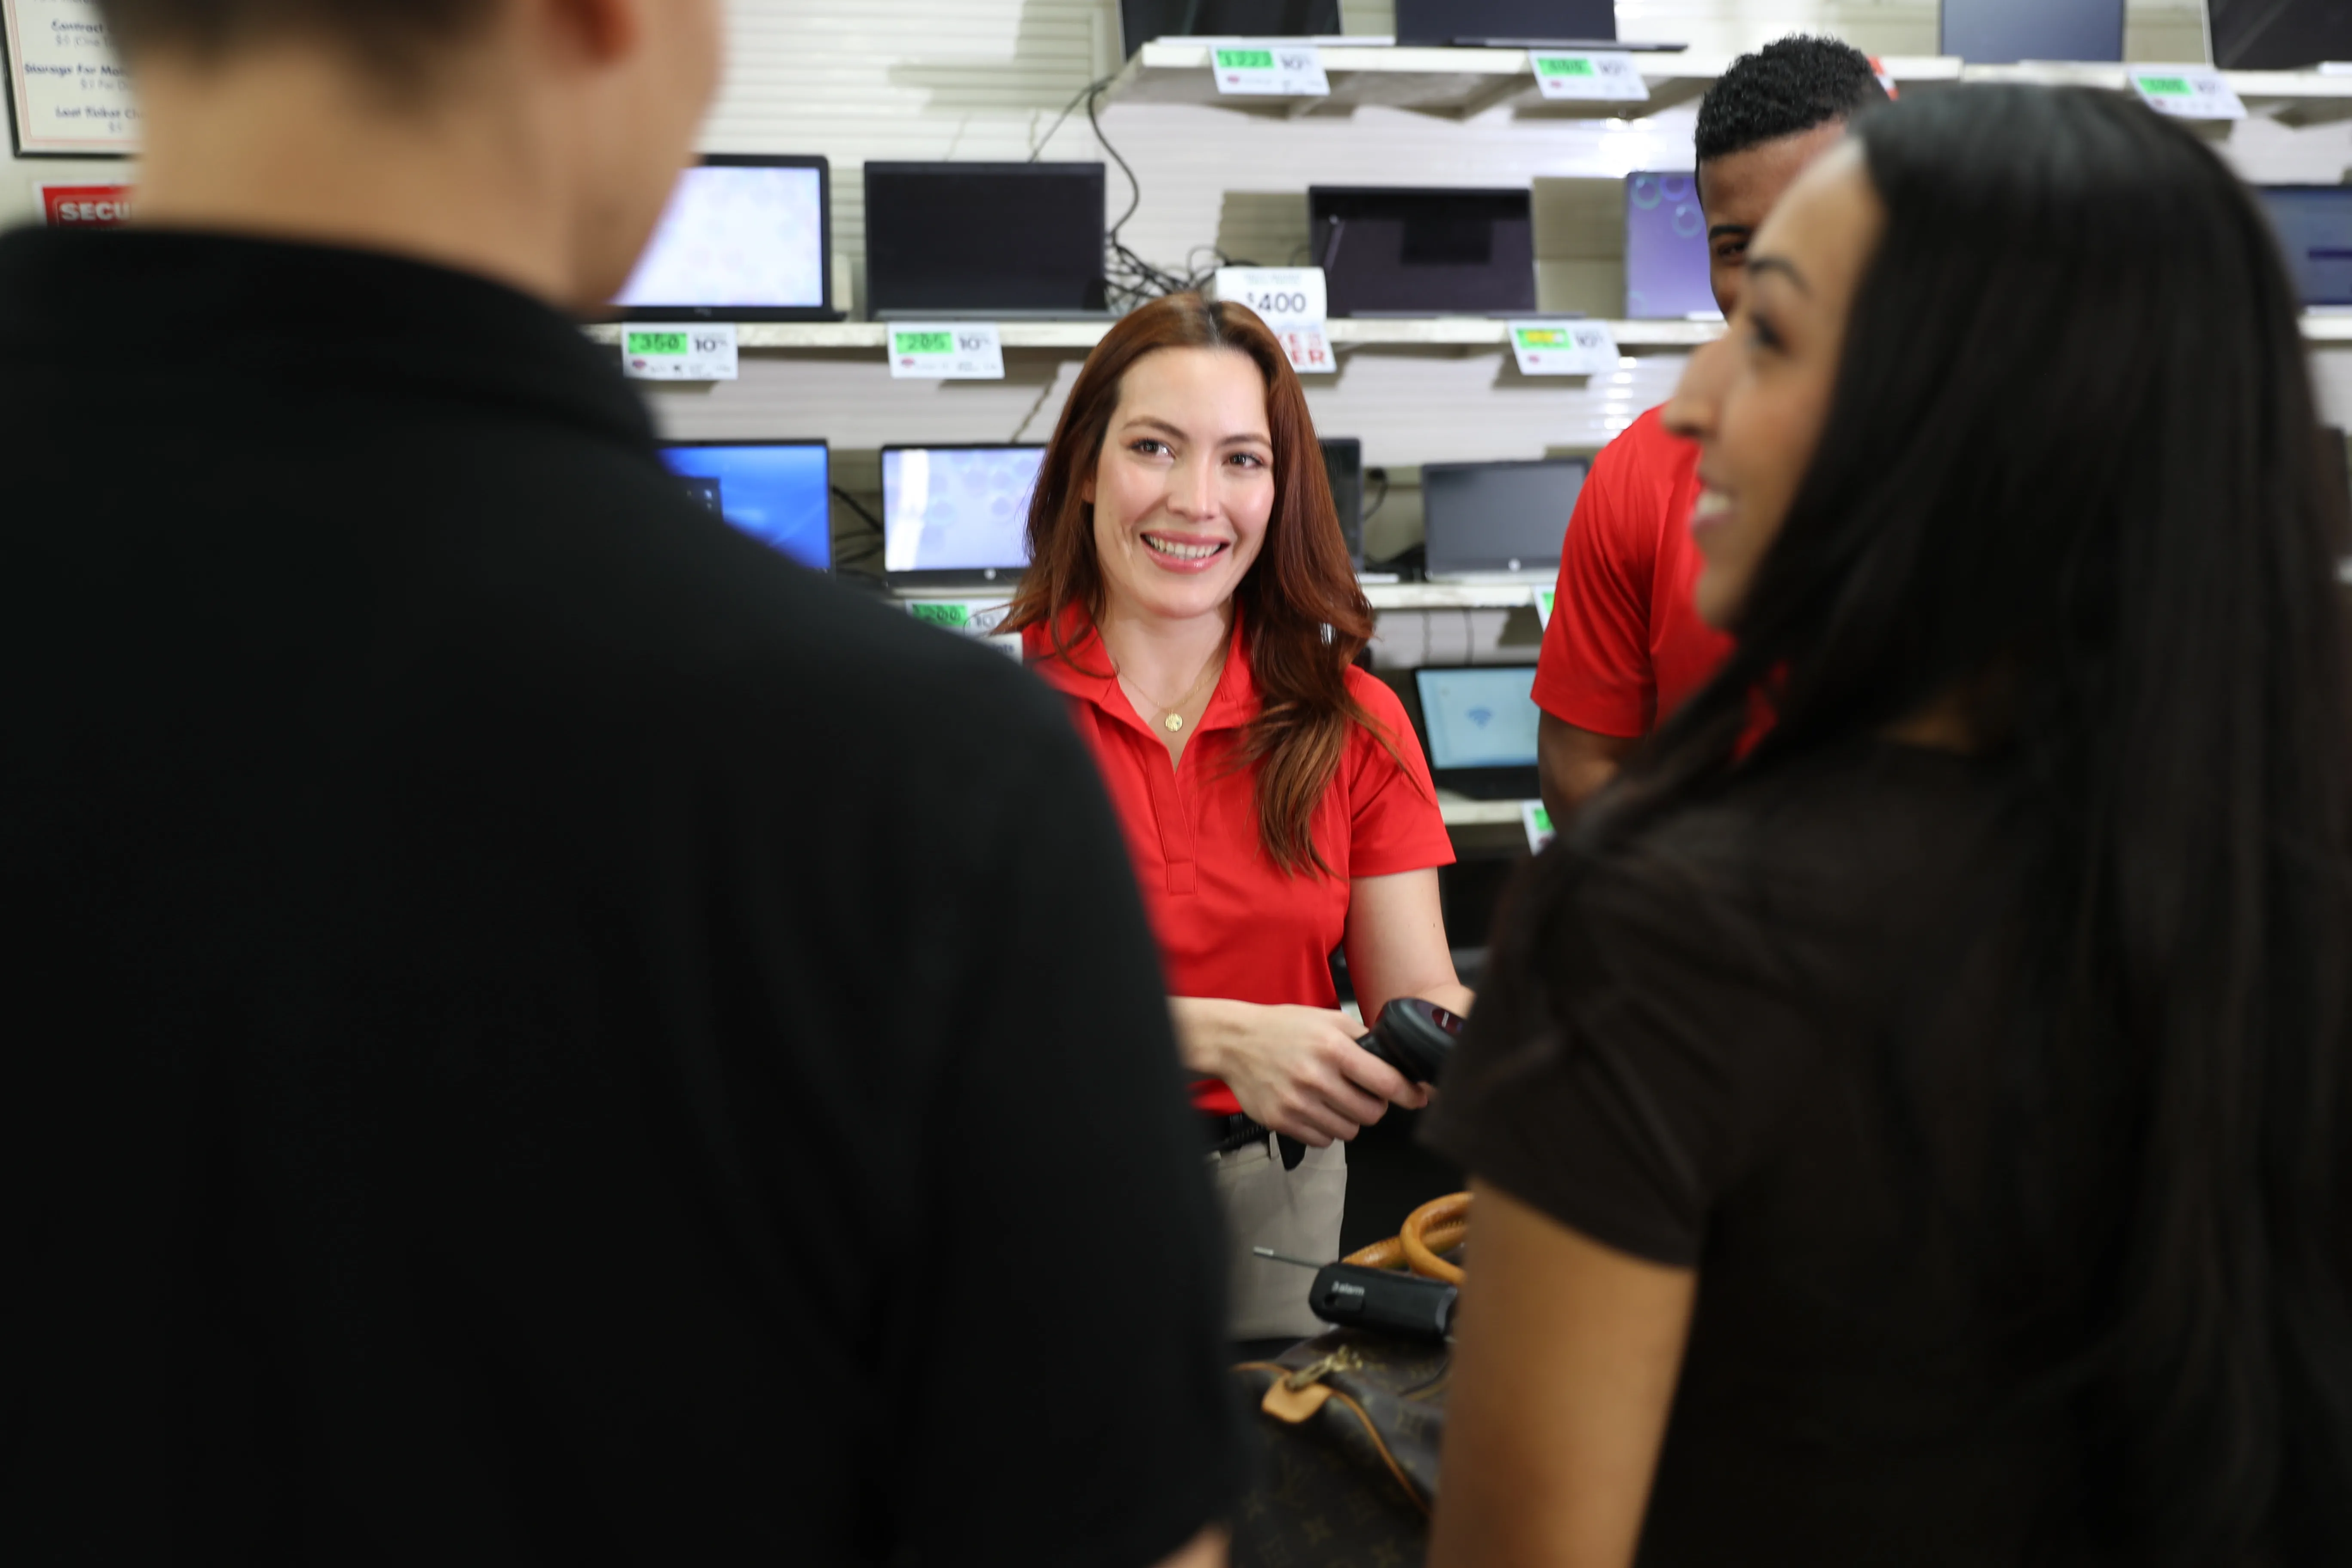 A team member in the background is center frame while smiling and checking out items a couple in the foreground have chosen to purchase. They have their backs turned to the camera and are out of focus.